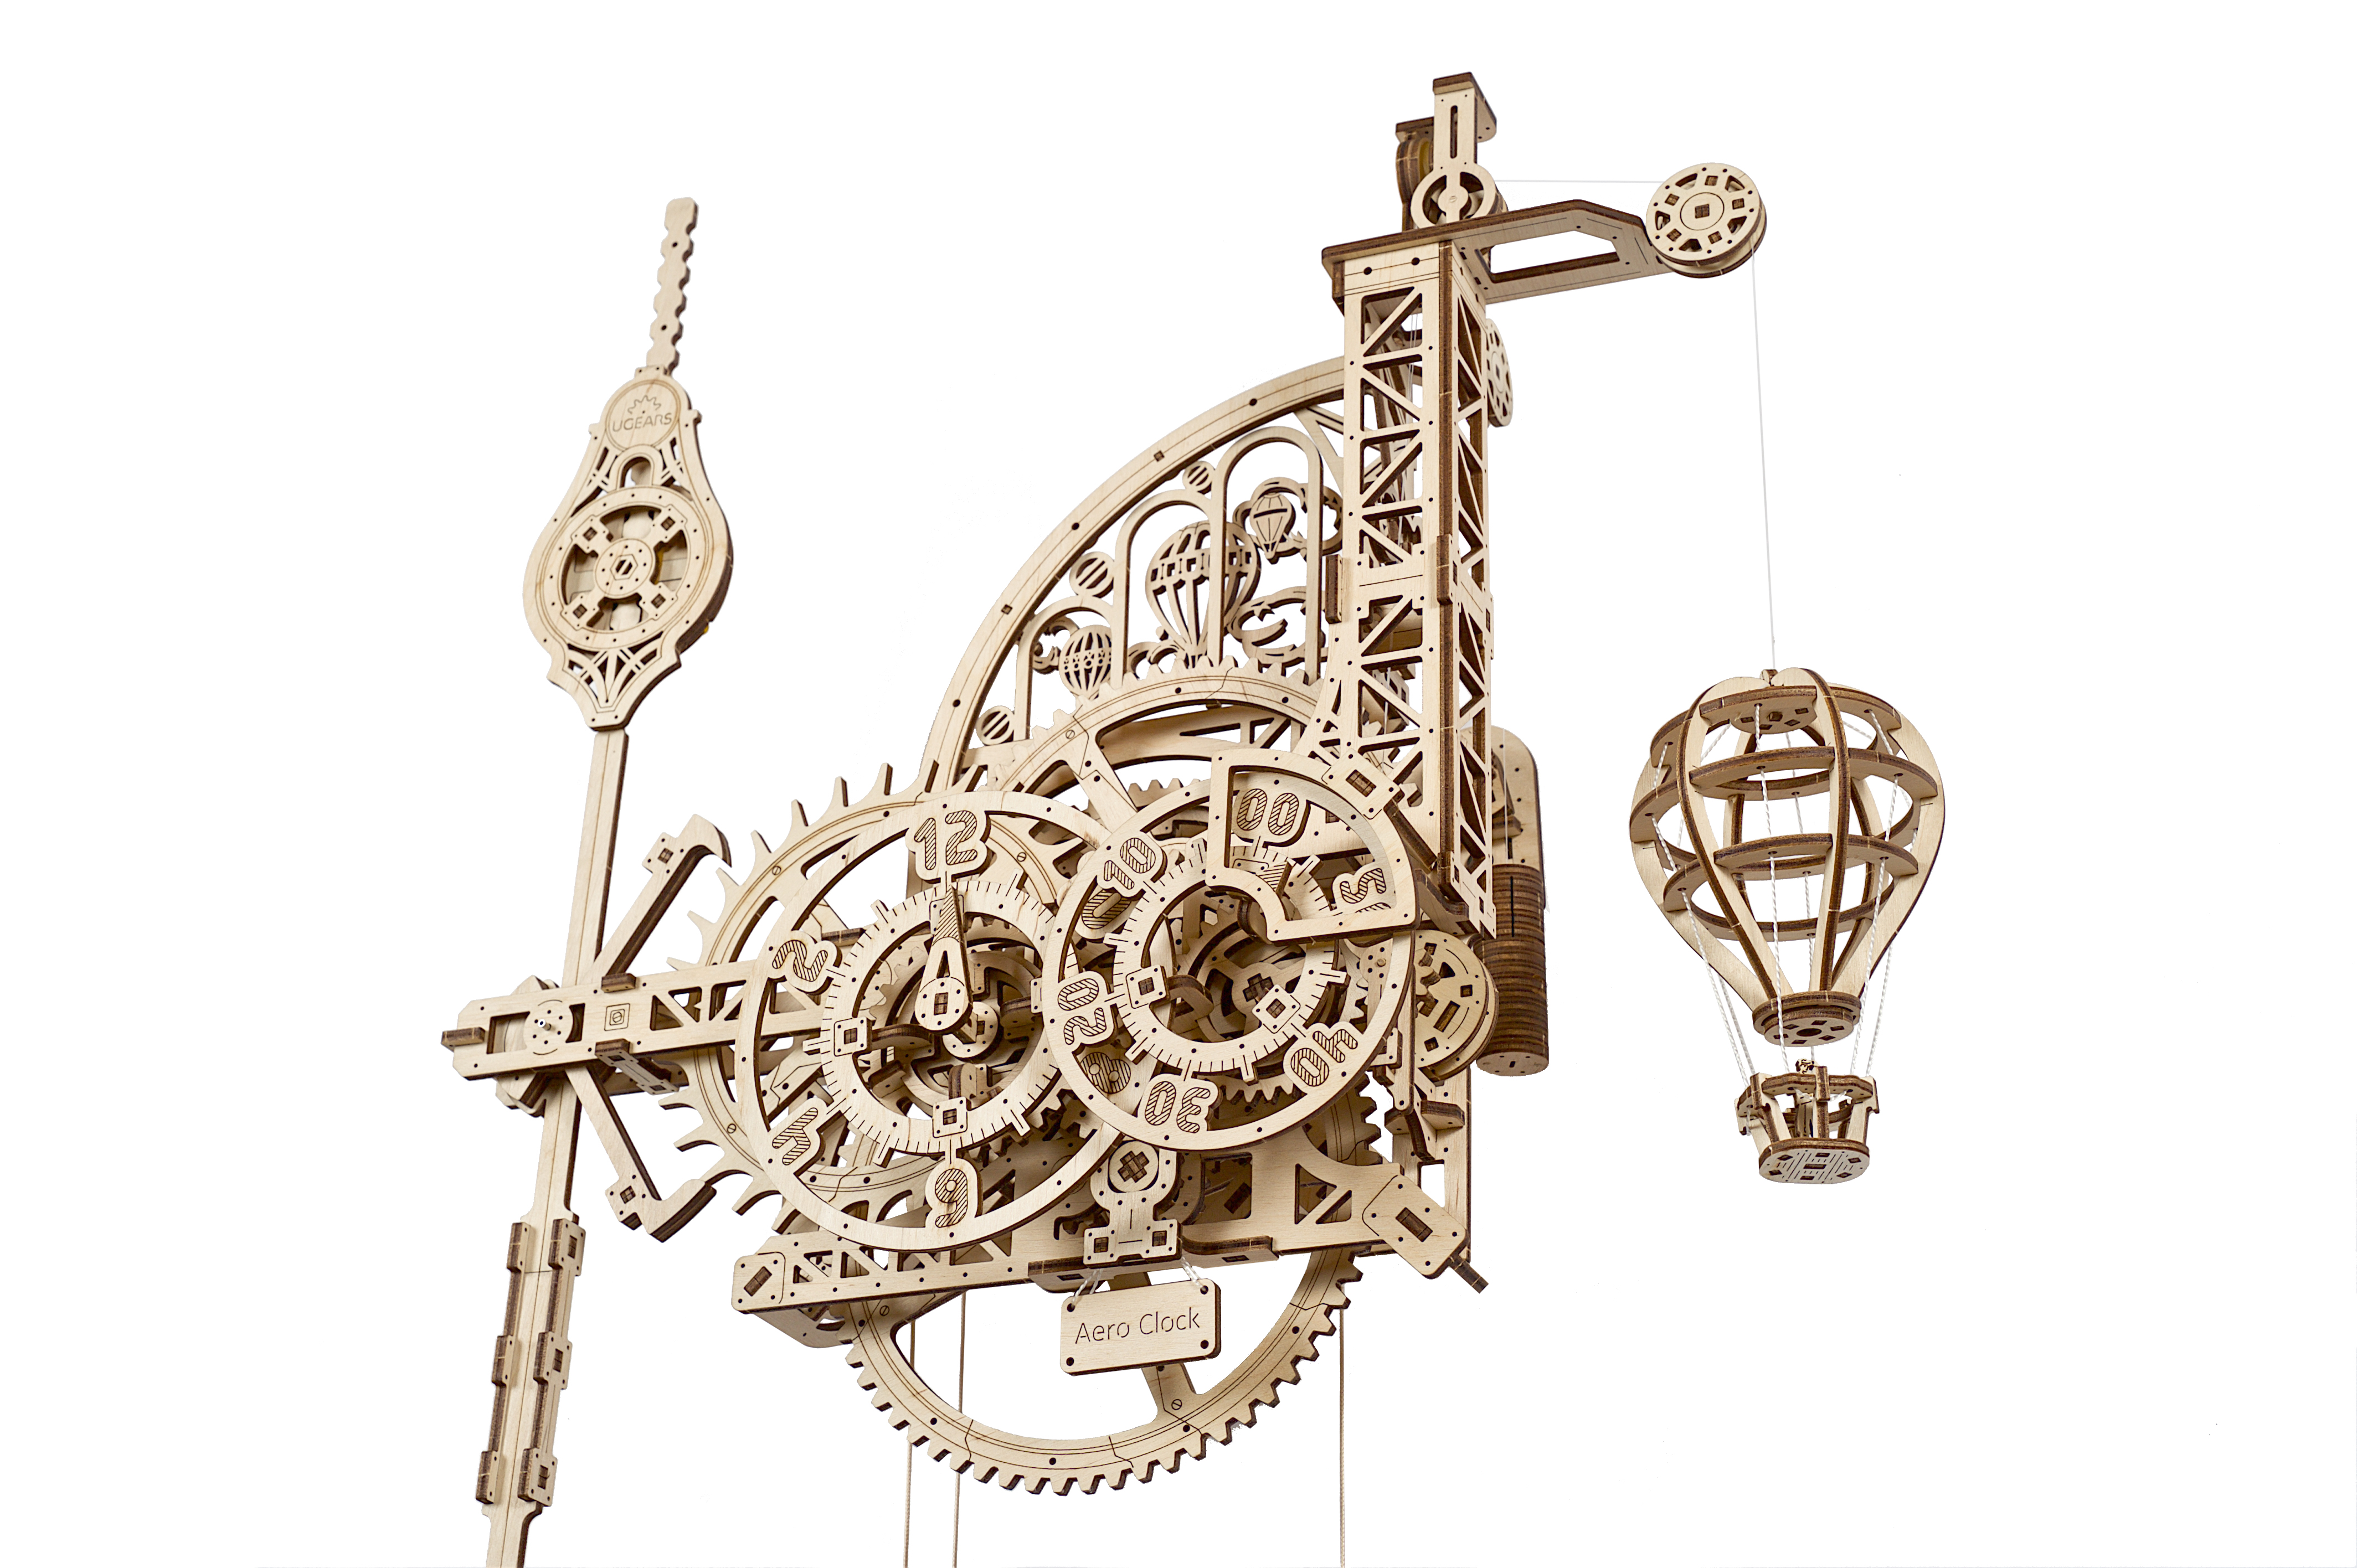 UGEARS Mechanical 3D Puzzle Wooden AERO WALL CLOCK Model for self-assembly 